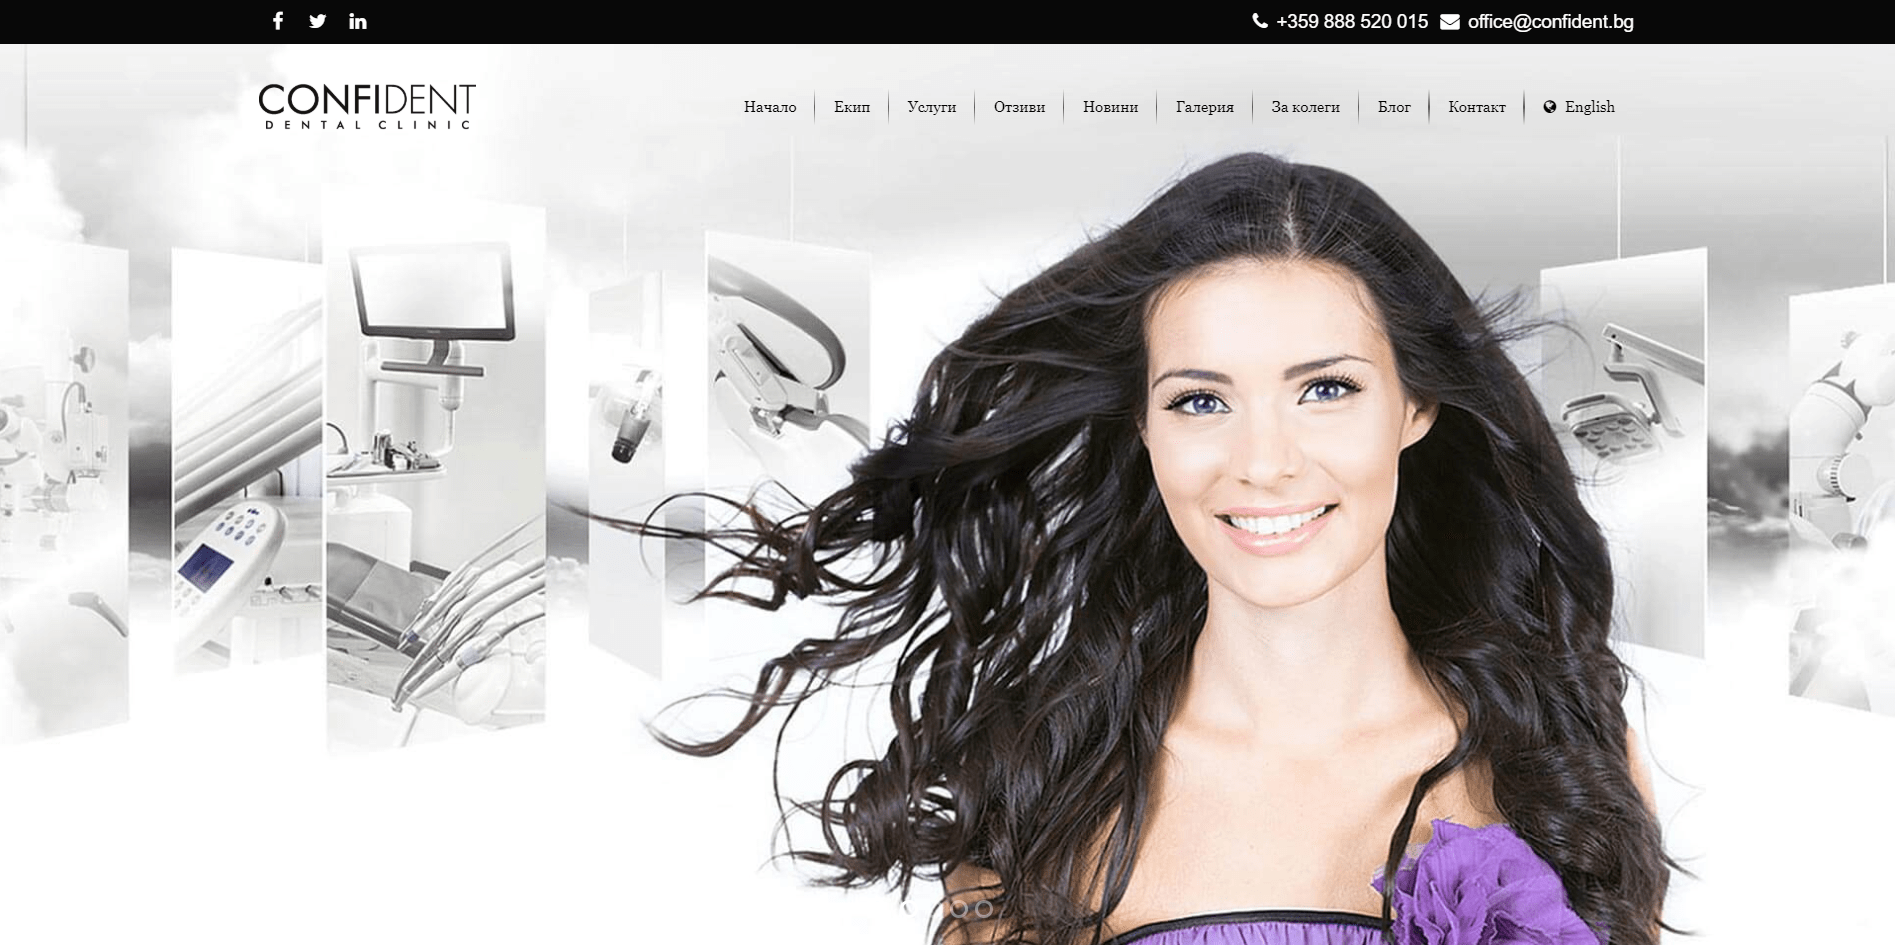 Confident Dental website was created by Entro Solutions team